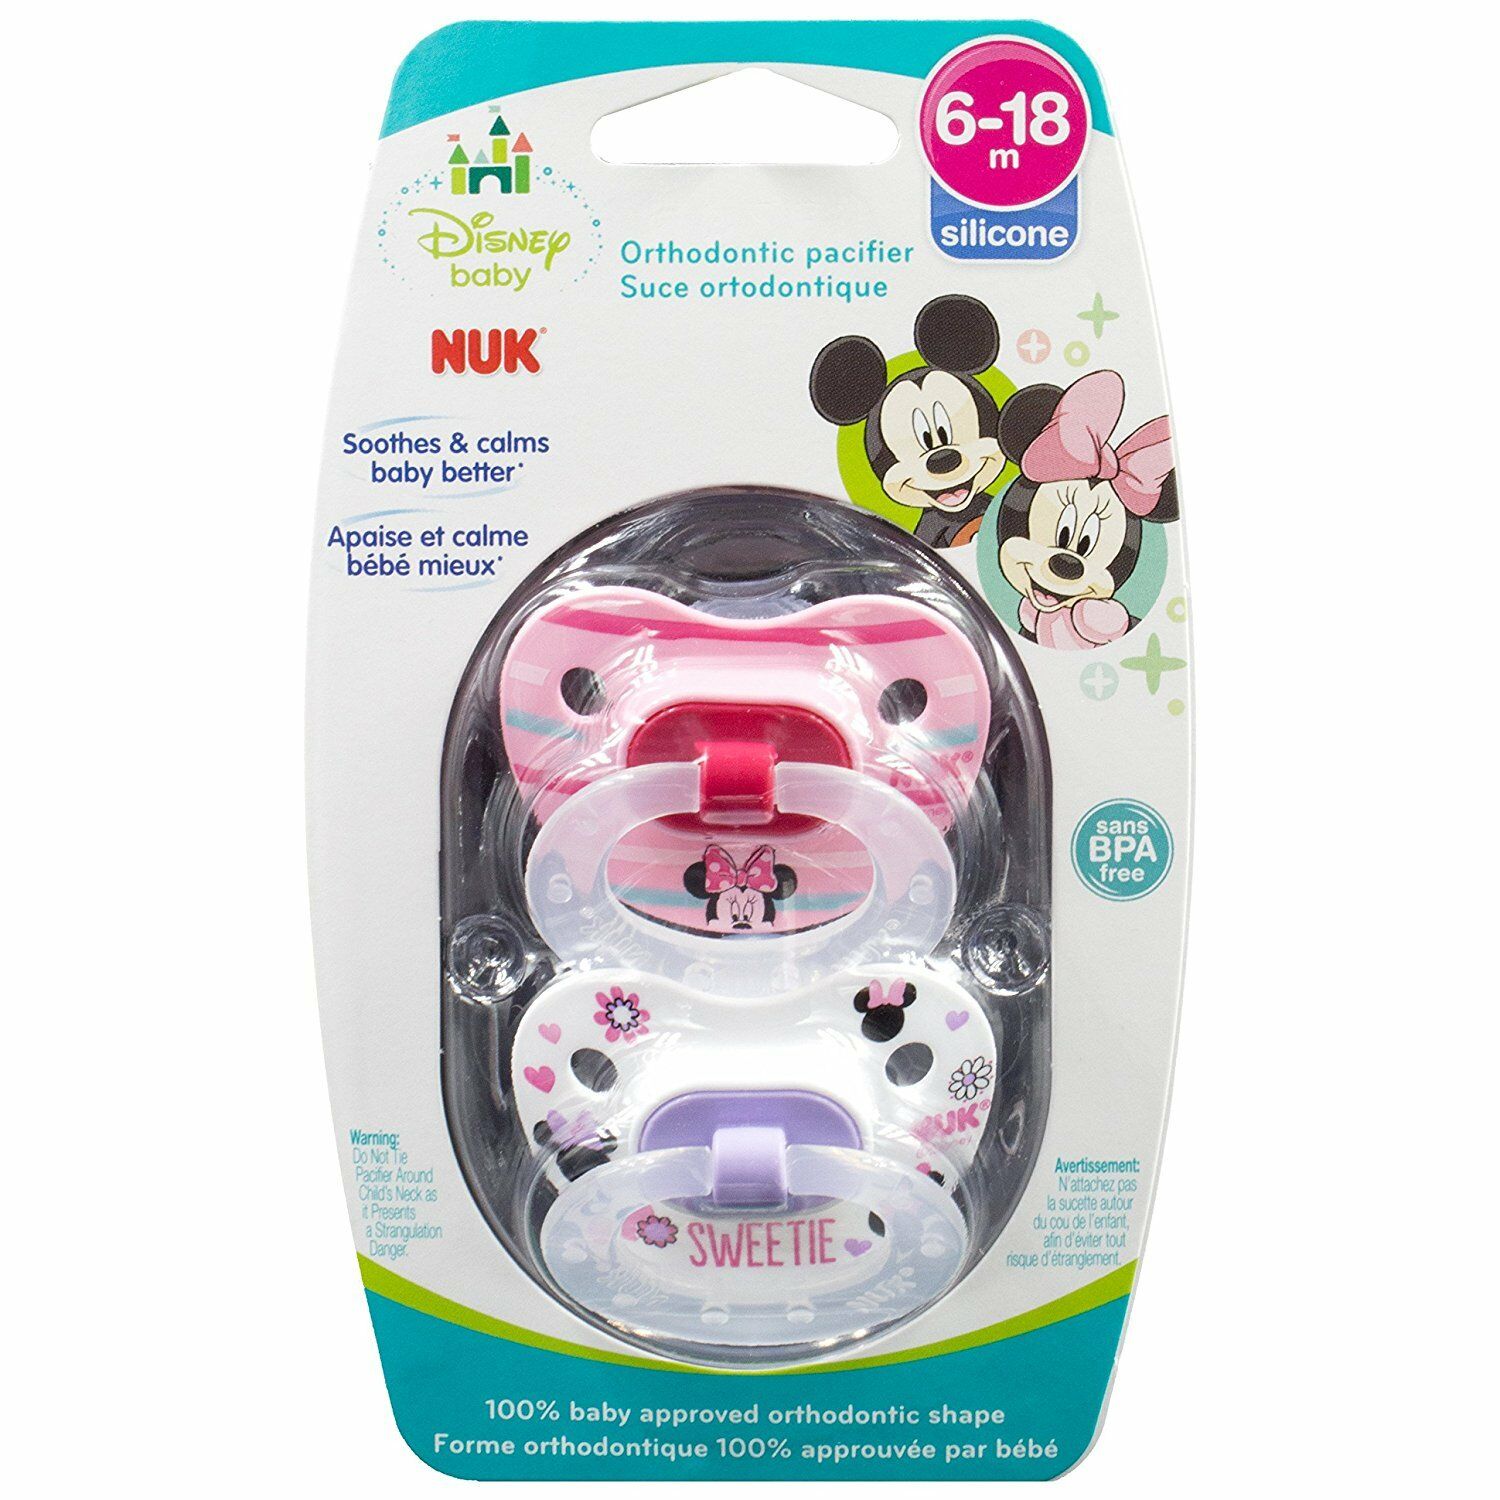 Nuk Disney Baby Puller Pacifier In Mickey, Minnie Colors And Styles, 6-18 Months